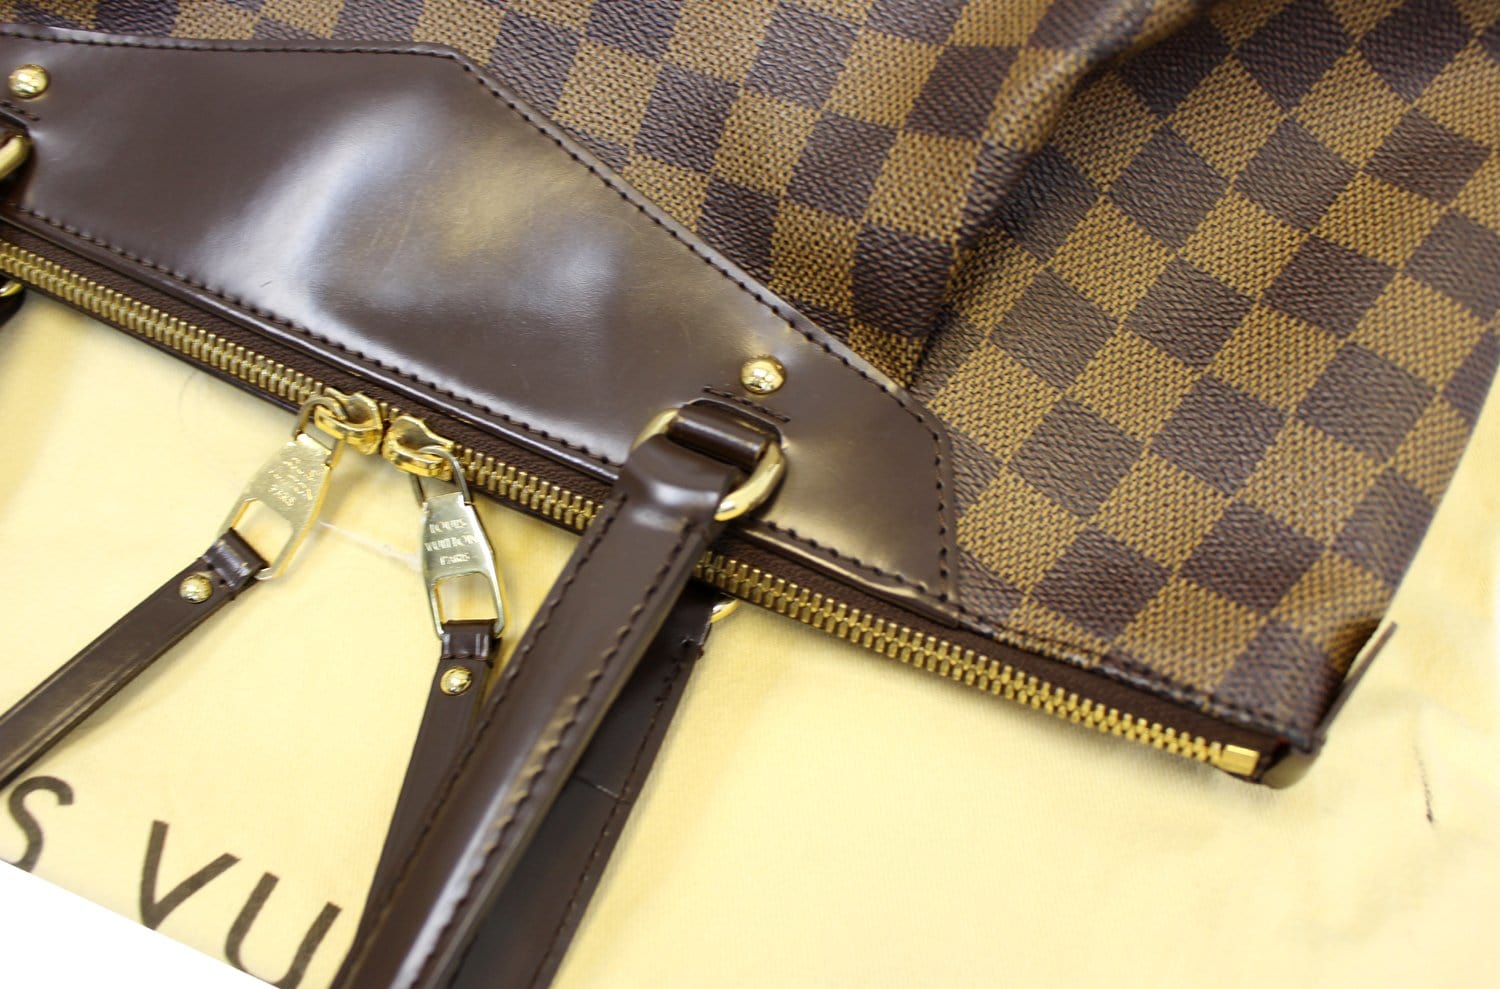 LOUIS VUITTON #42308 Damier Ebene Westminister GM Bag – ALL YOUR BLISS